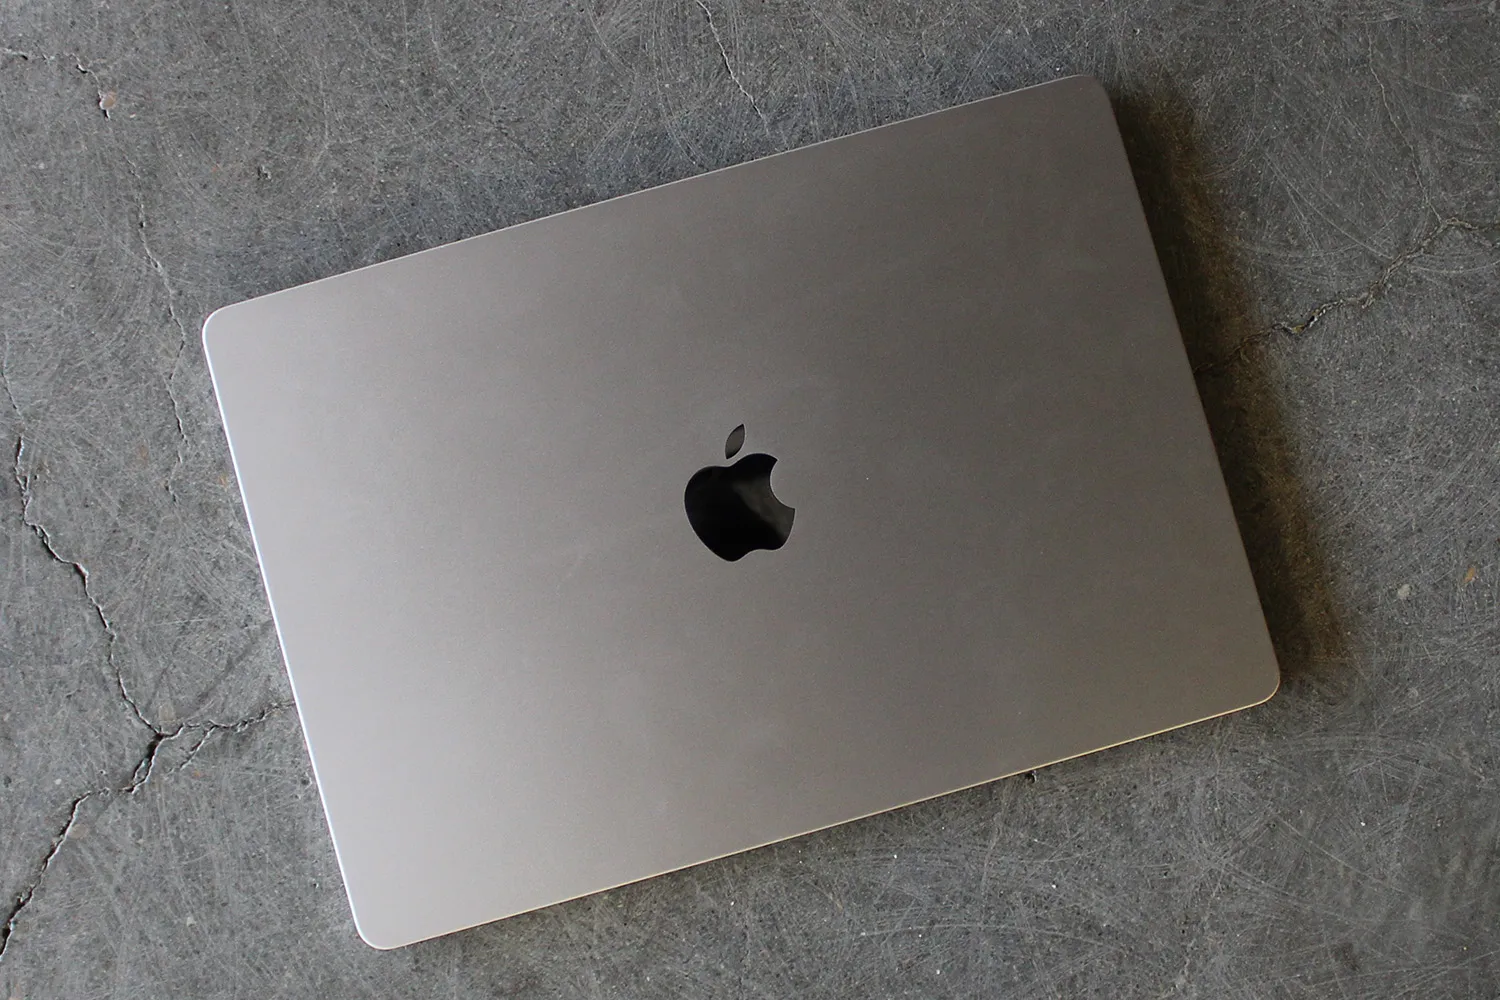 The lid of Apple’s 15-inch MacBook Air seem from above.